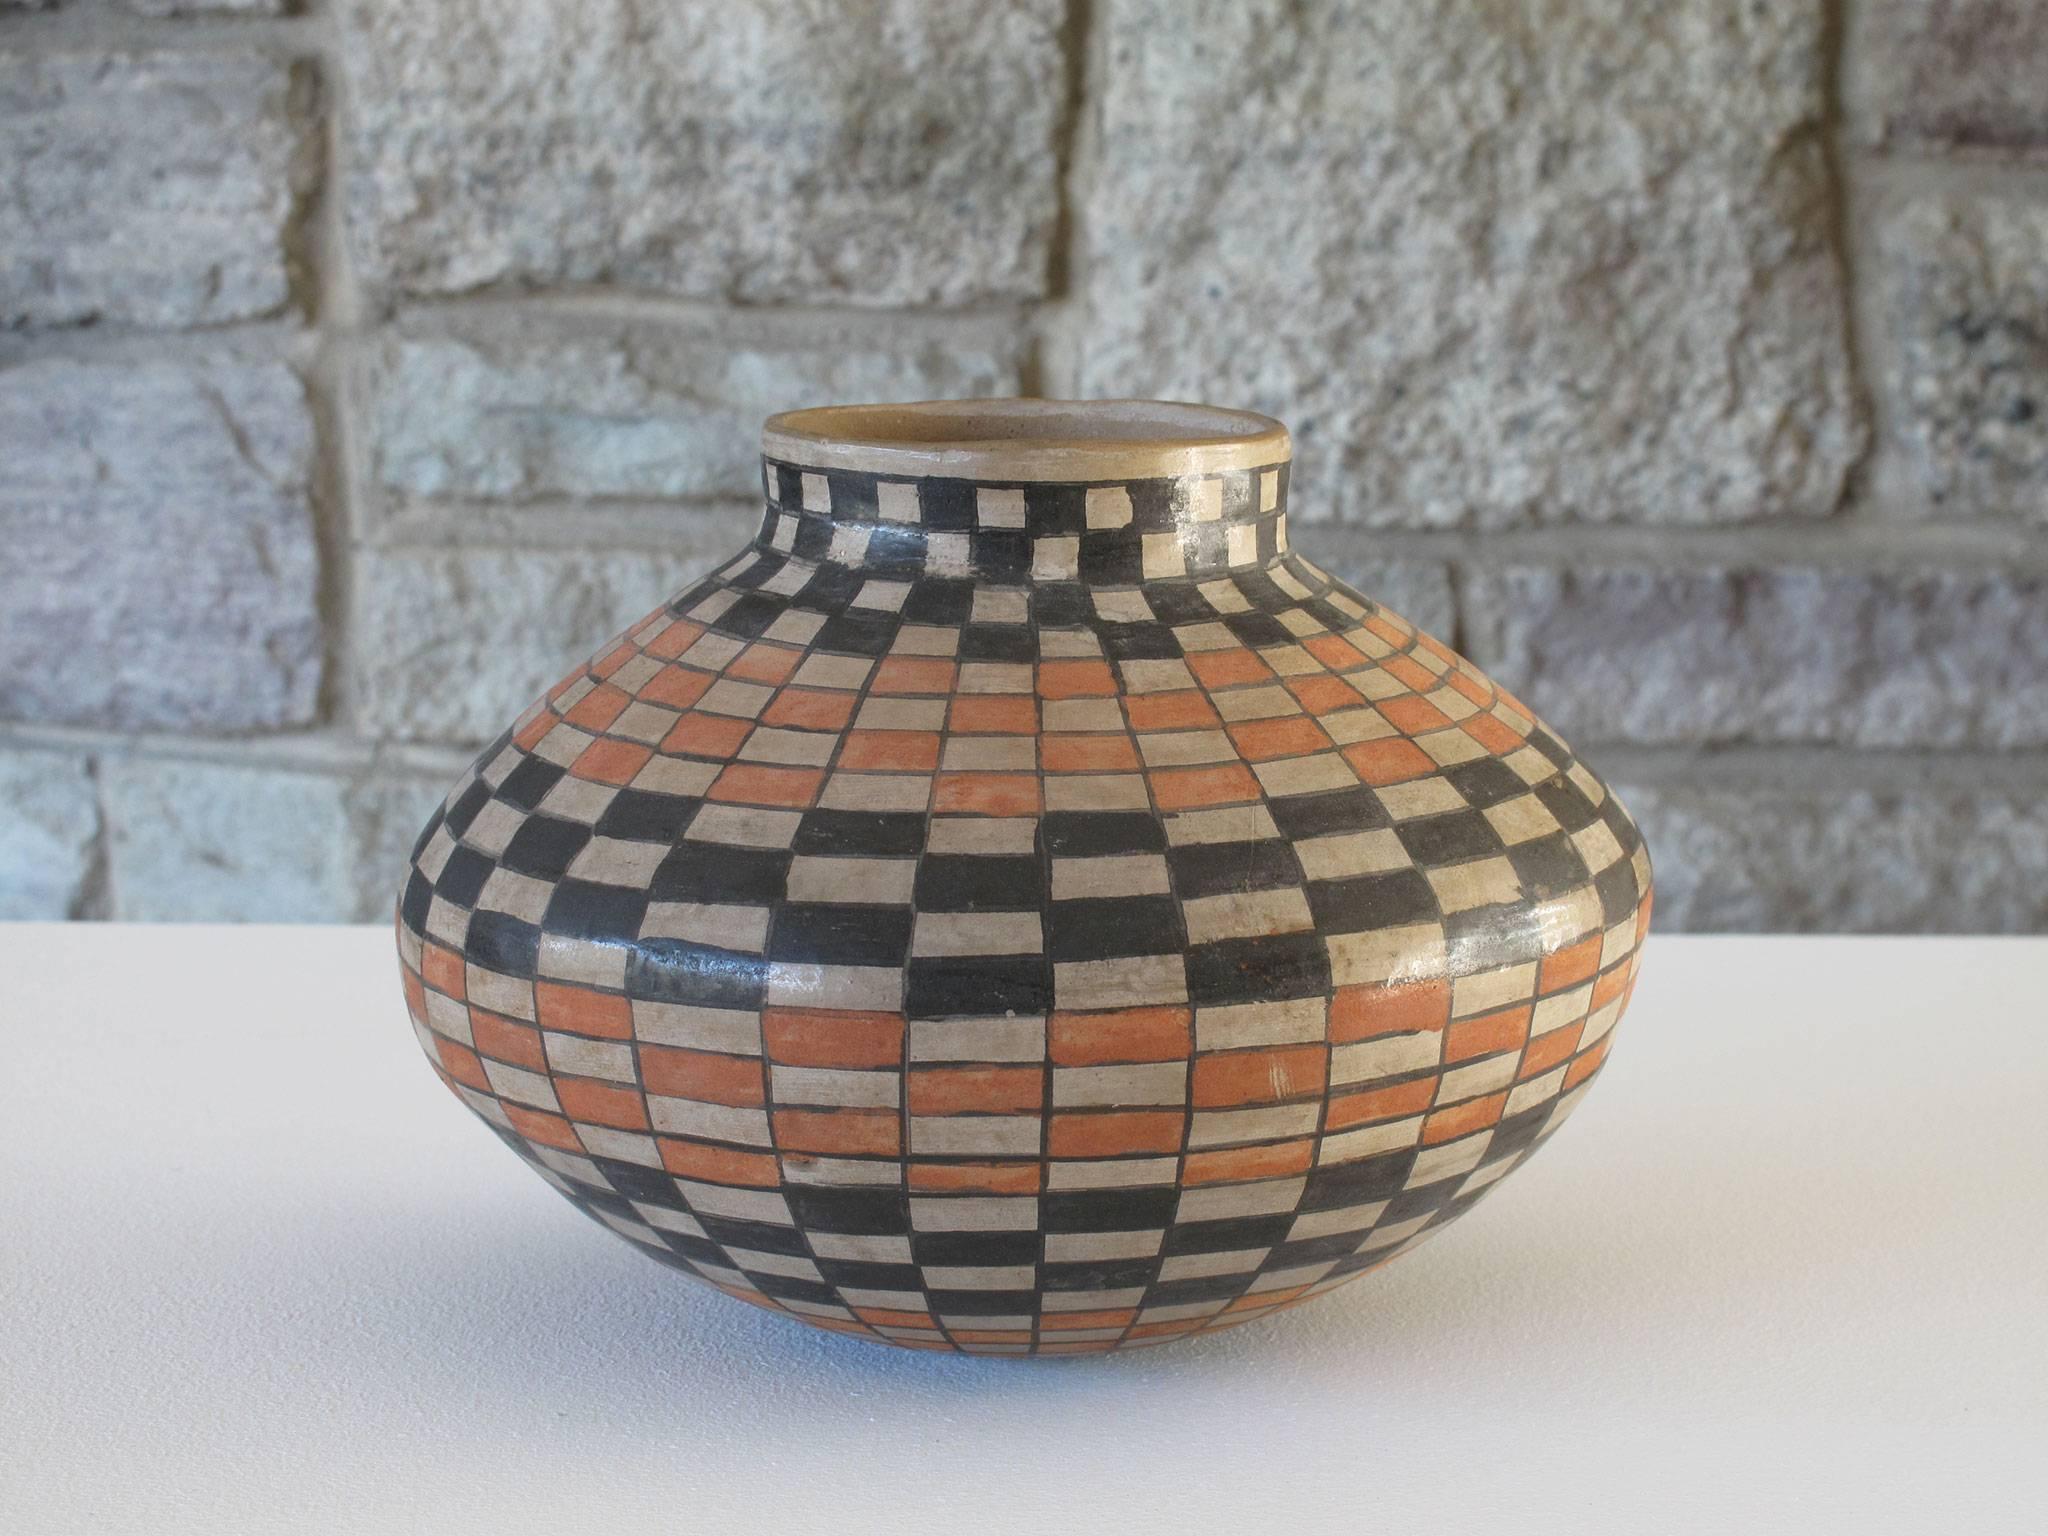 Fantastic, ceramic decorative from the tradition of Mata Ortiz pottery with an artsy grid design, handmade and polished with sand by Casa Grandes Pueblo ceramicist Emeterio Ortiz R, 1970s, signed by the artist. Dimensions: 4.75 high x 6.25 diameter